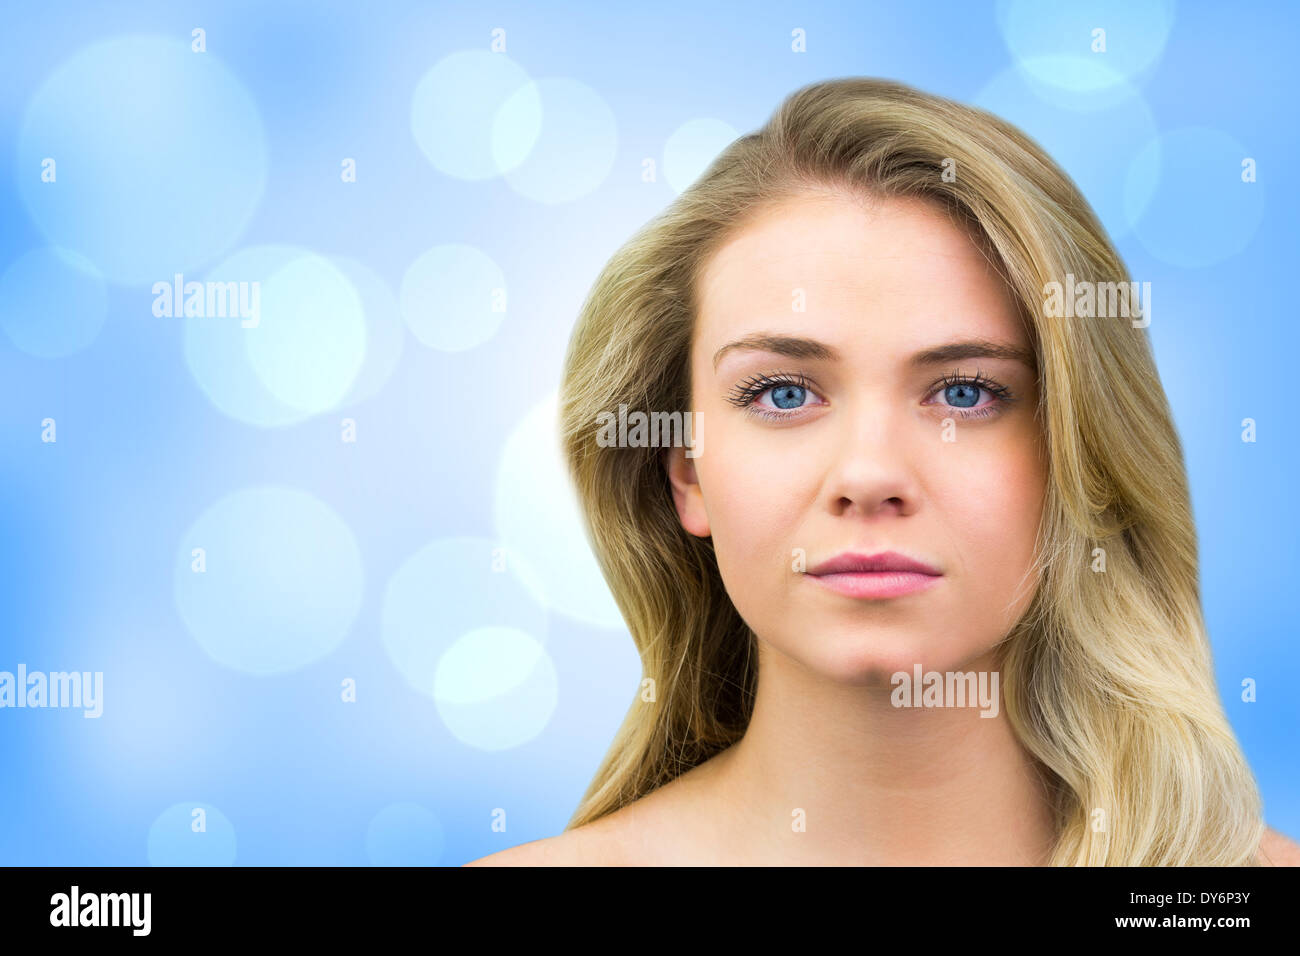 Composite image of serious blonde natural beauty Stock Photo